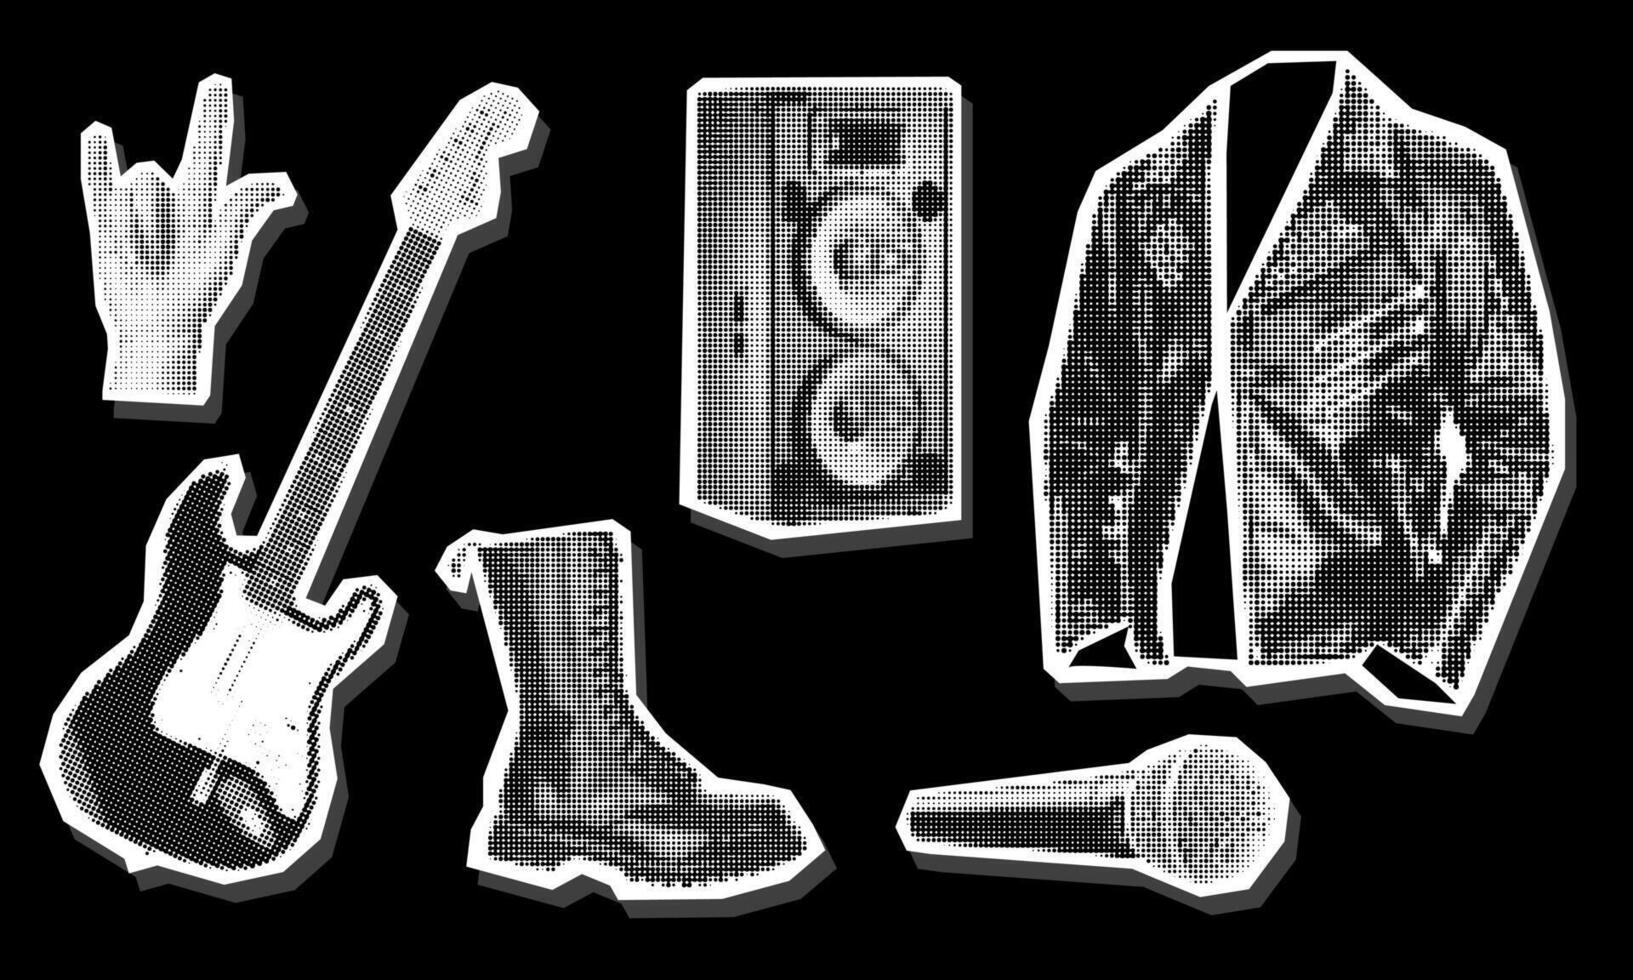 Rock set in a collage in the style of grunge pop art. Black and white image on black. Clothes look like a clipping from a magazine. Bright large and small dots create a figure. Music Monochrome art vector